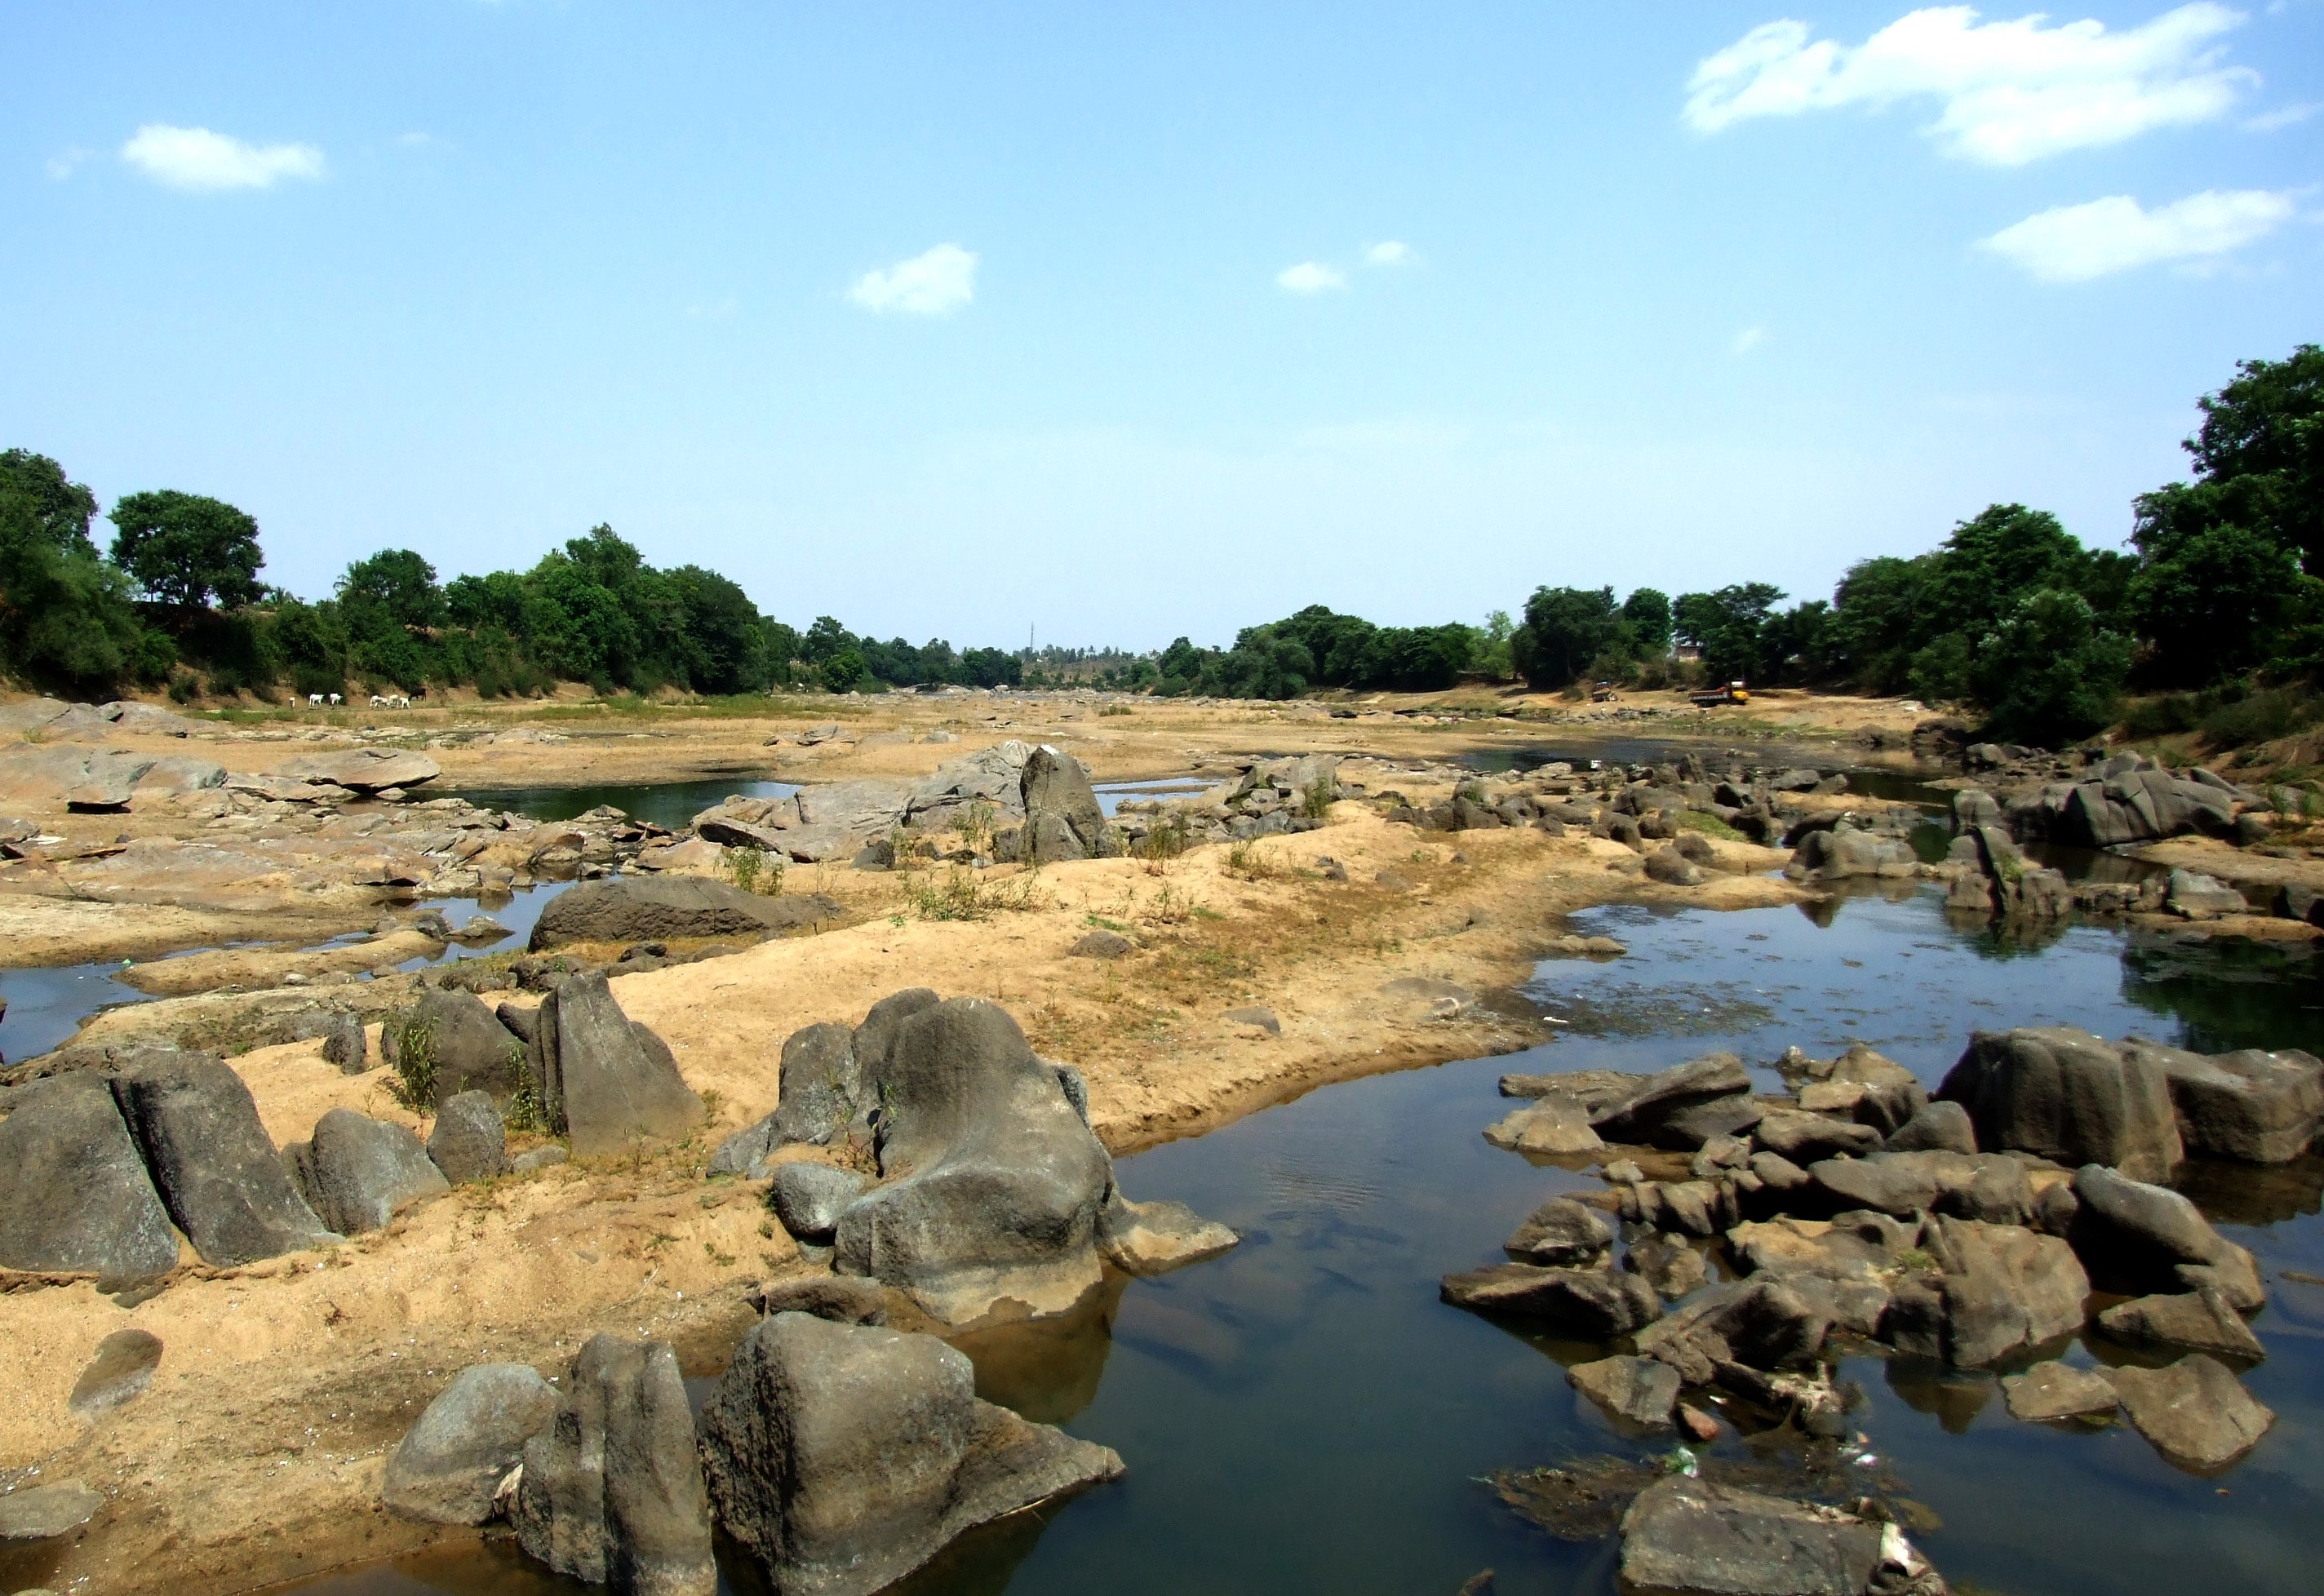 Rampant and illegal sand mining had exposed the spine of the river. Credit: Nisarg Prakash